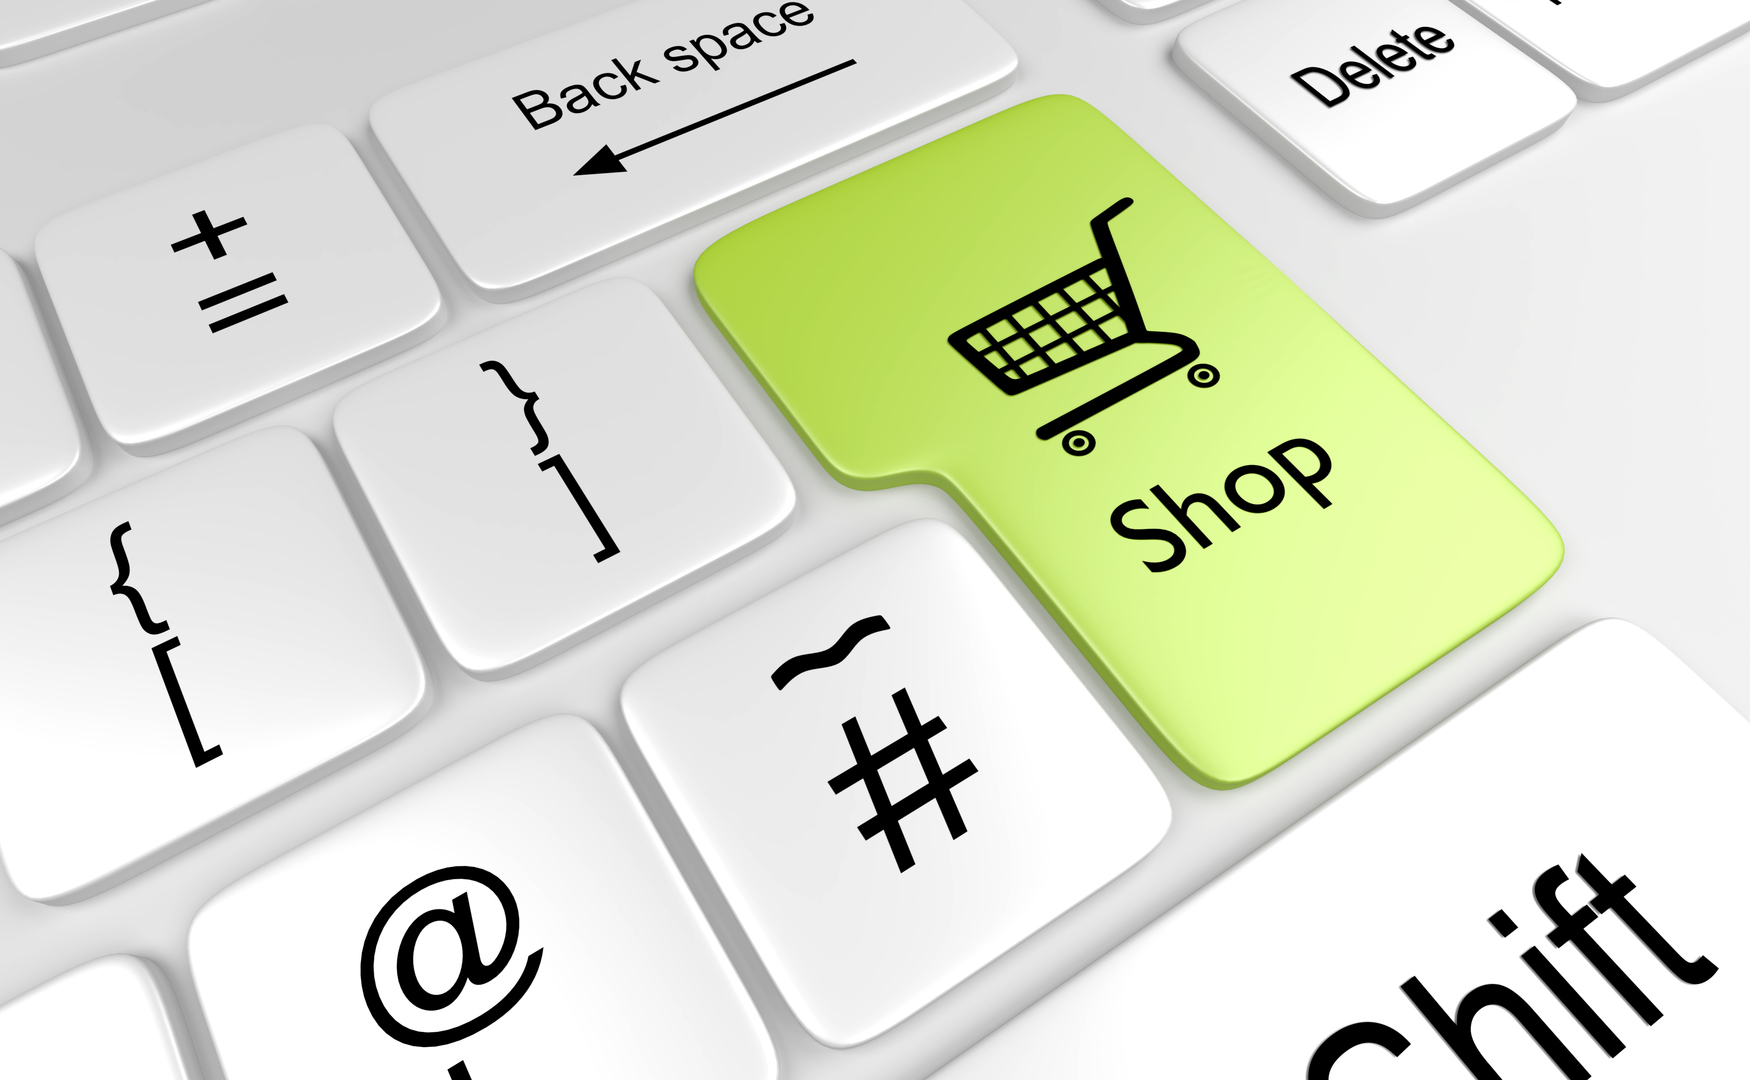 online shopping computer keyboard commerce shopping cart shopping computer key 1445129 pxhere.com  - How to get cheap Amazon deals without shopping on Amazon